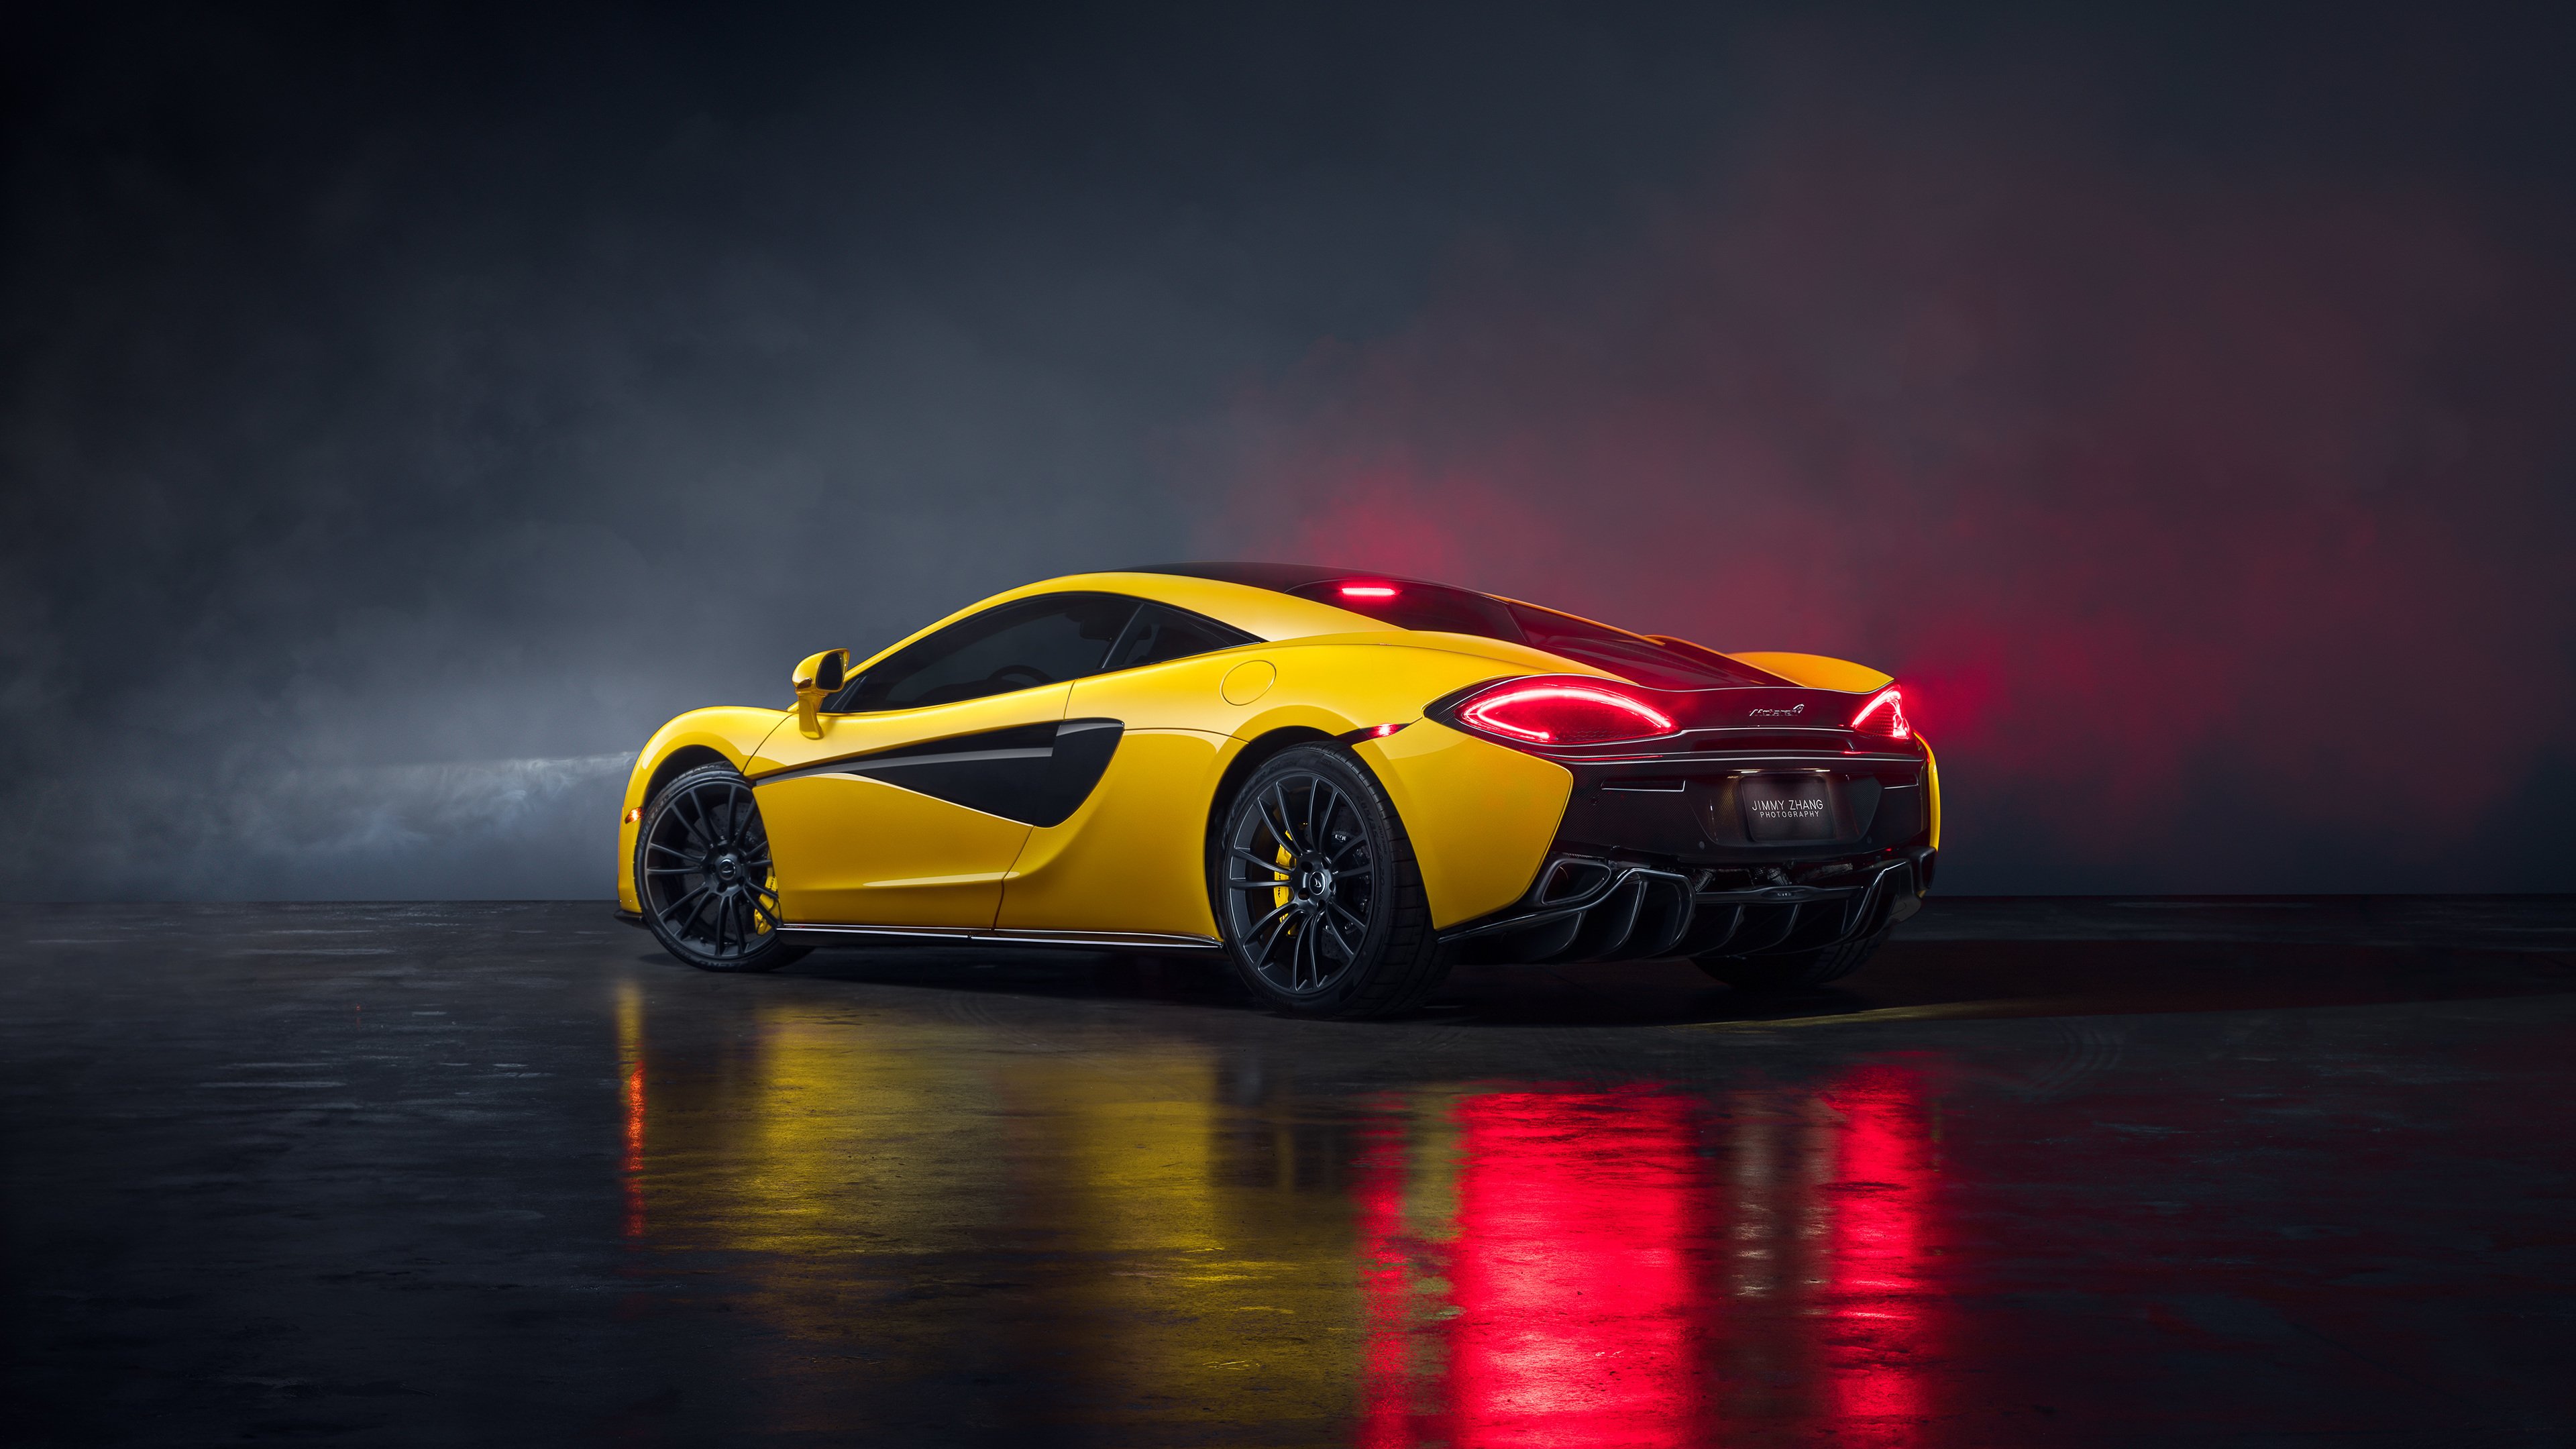 4K Wallpaper For Pc Of Cars Trick